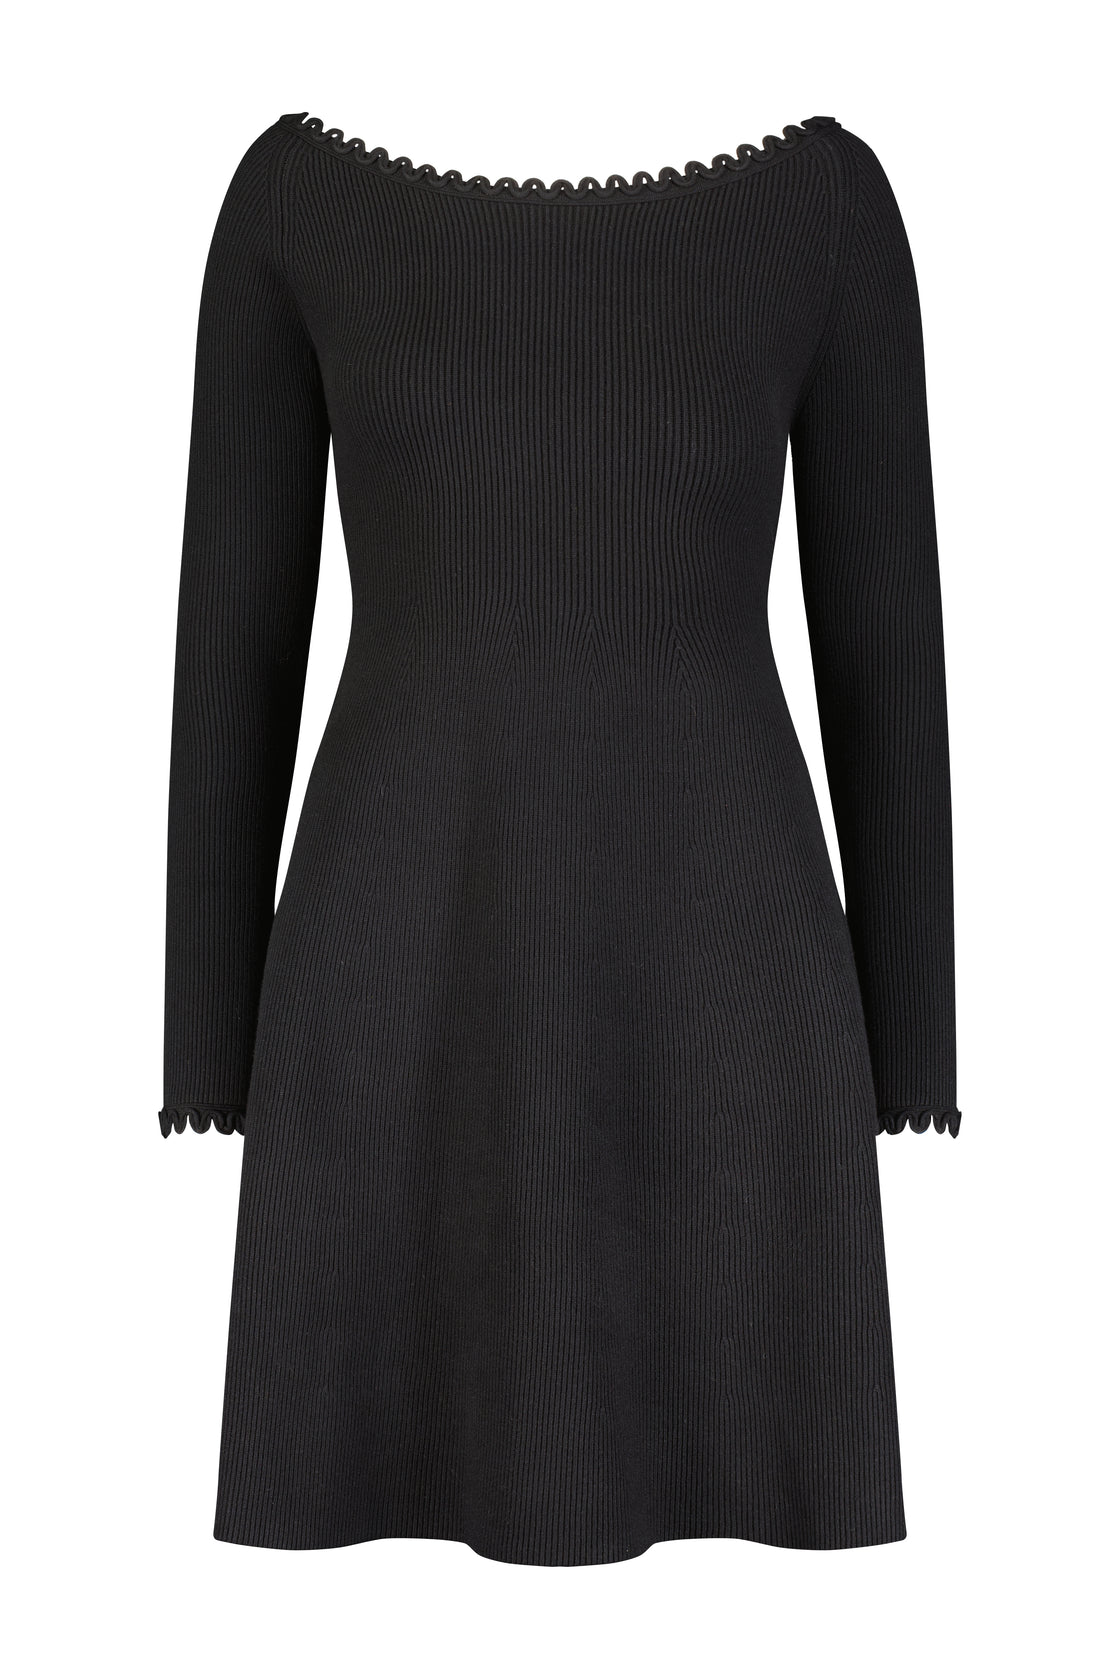 Rib Knit Open Neck Fit and Flare Dress